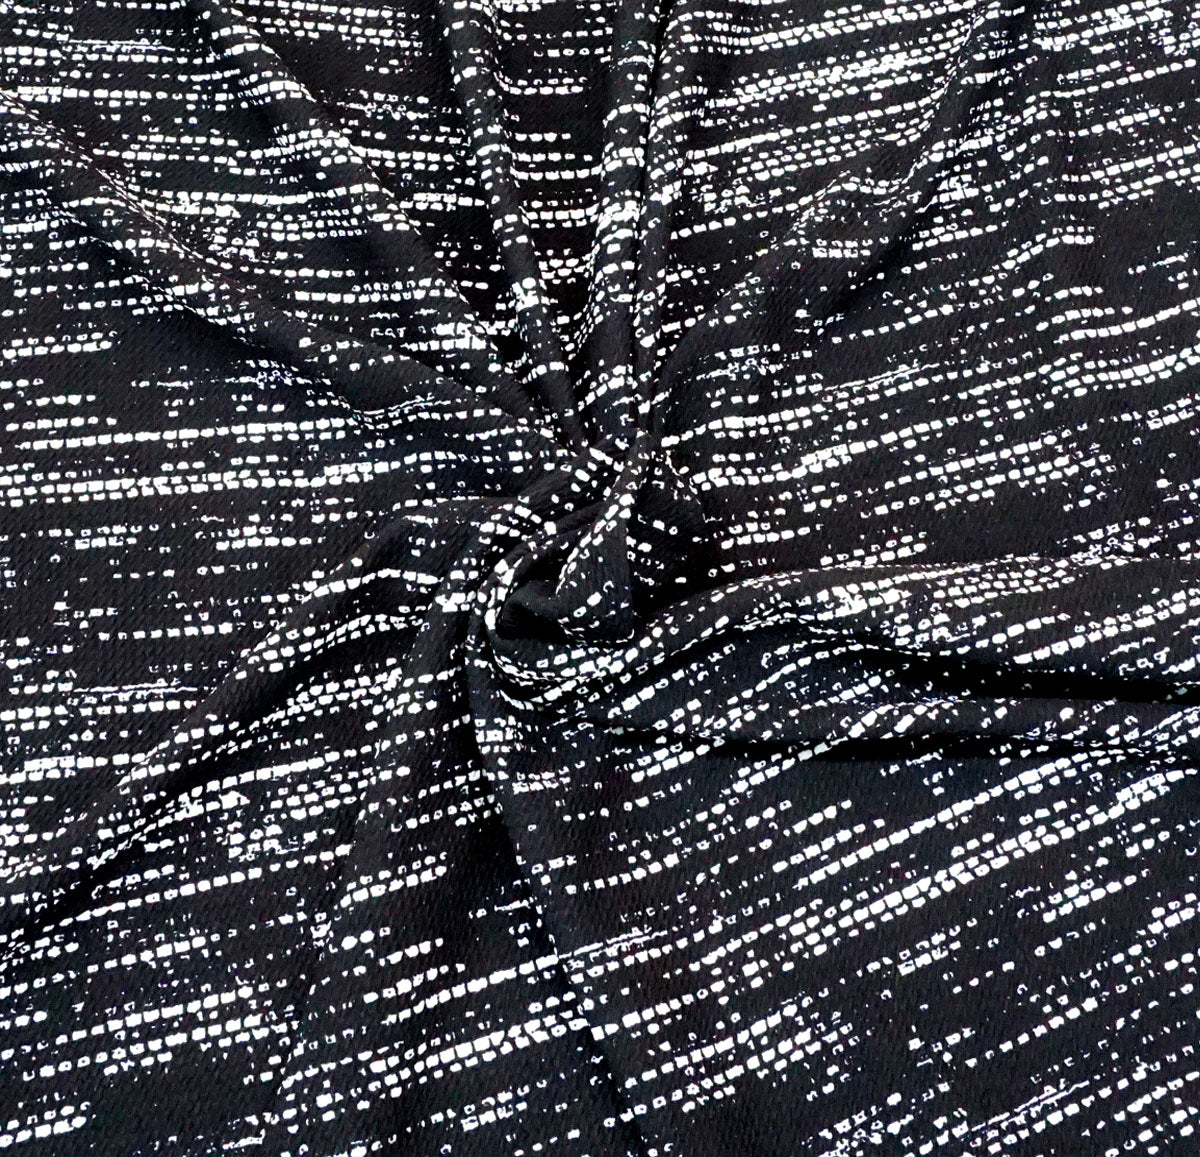 Bullet Knit Printed Fabric-Black White Gravity-BPR028-Sold by the Yard